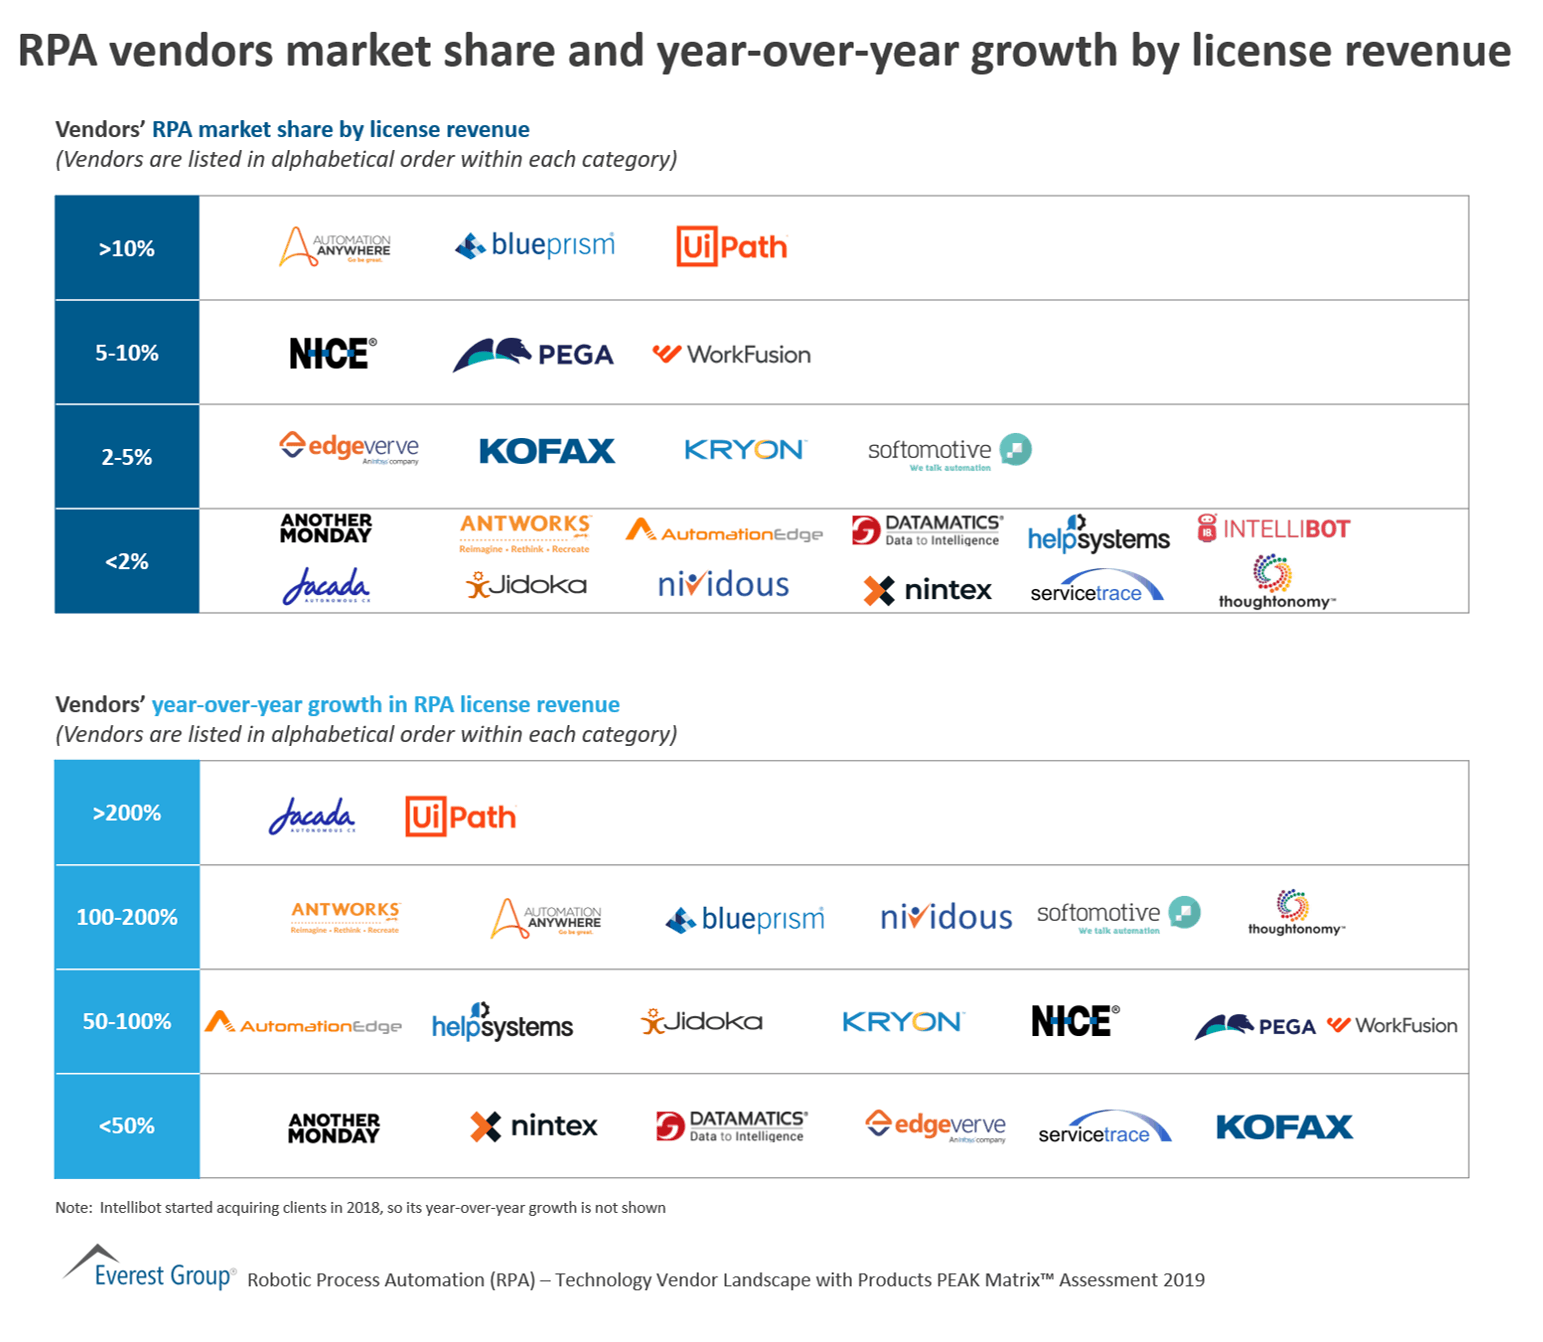 RPA vendors market share and year-over-year growth by license revenue